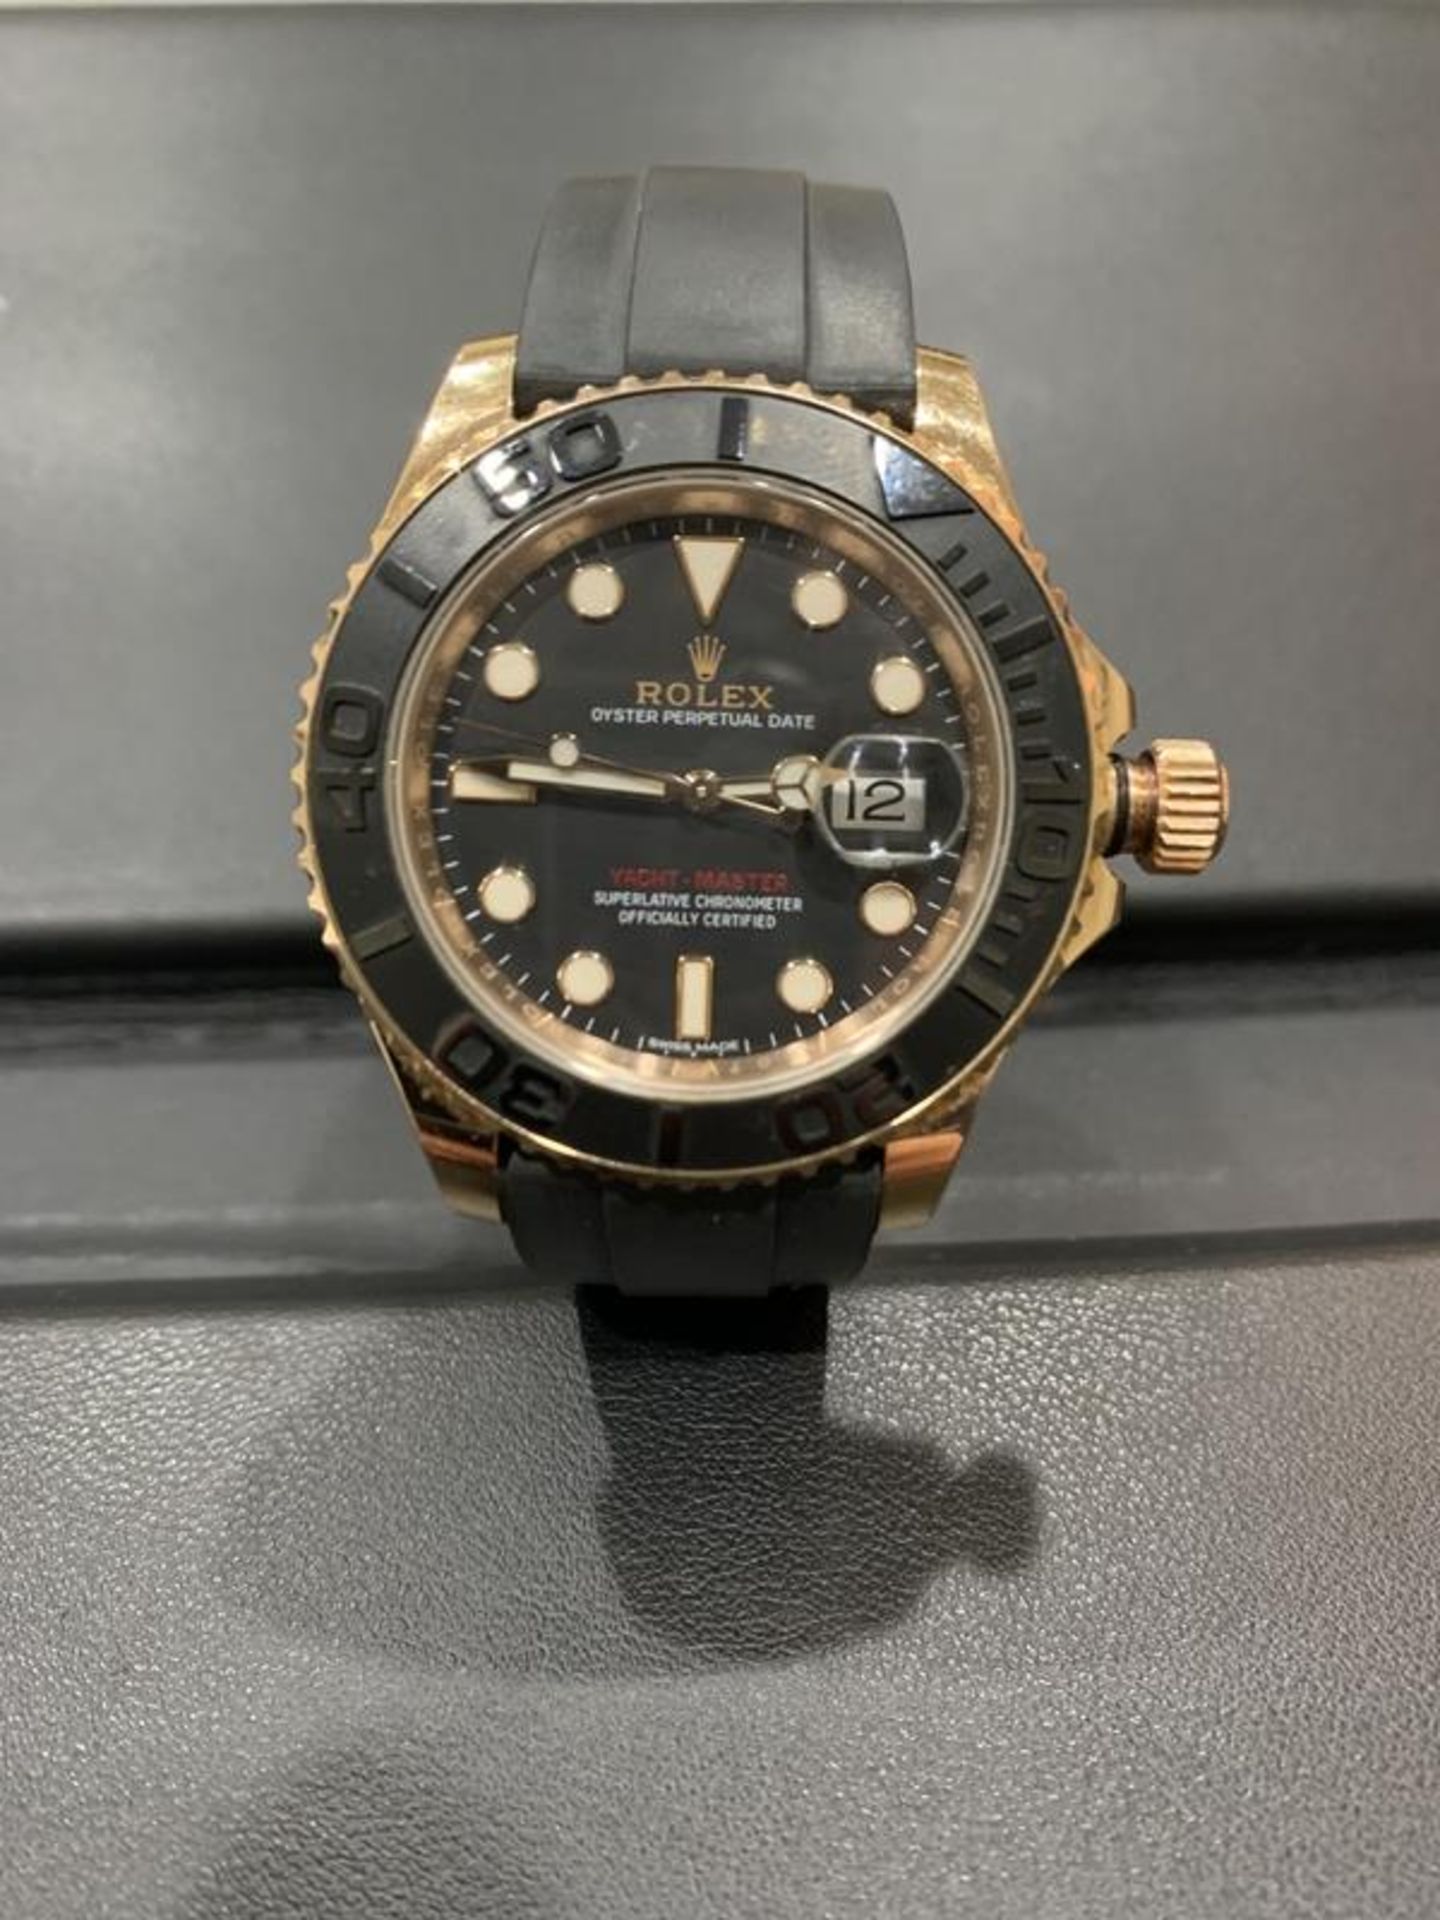 ROLEX Yacht-Master Mens 40mm everose gold, black face - no box or paperwork included - Serial: - Image 2 of 7